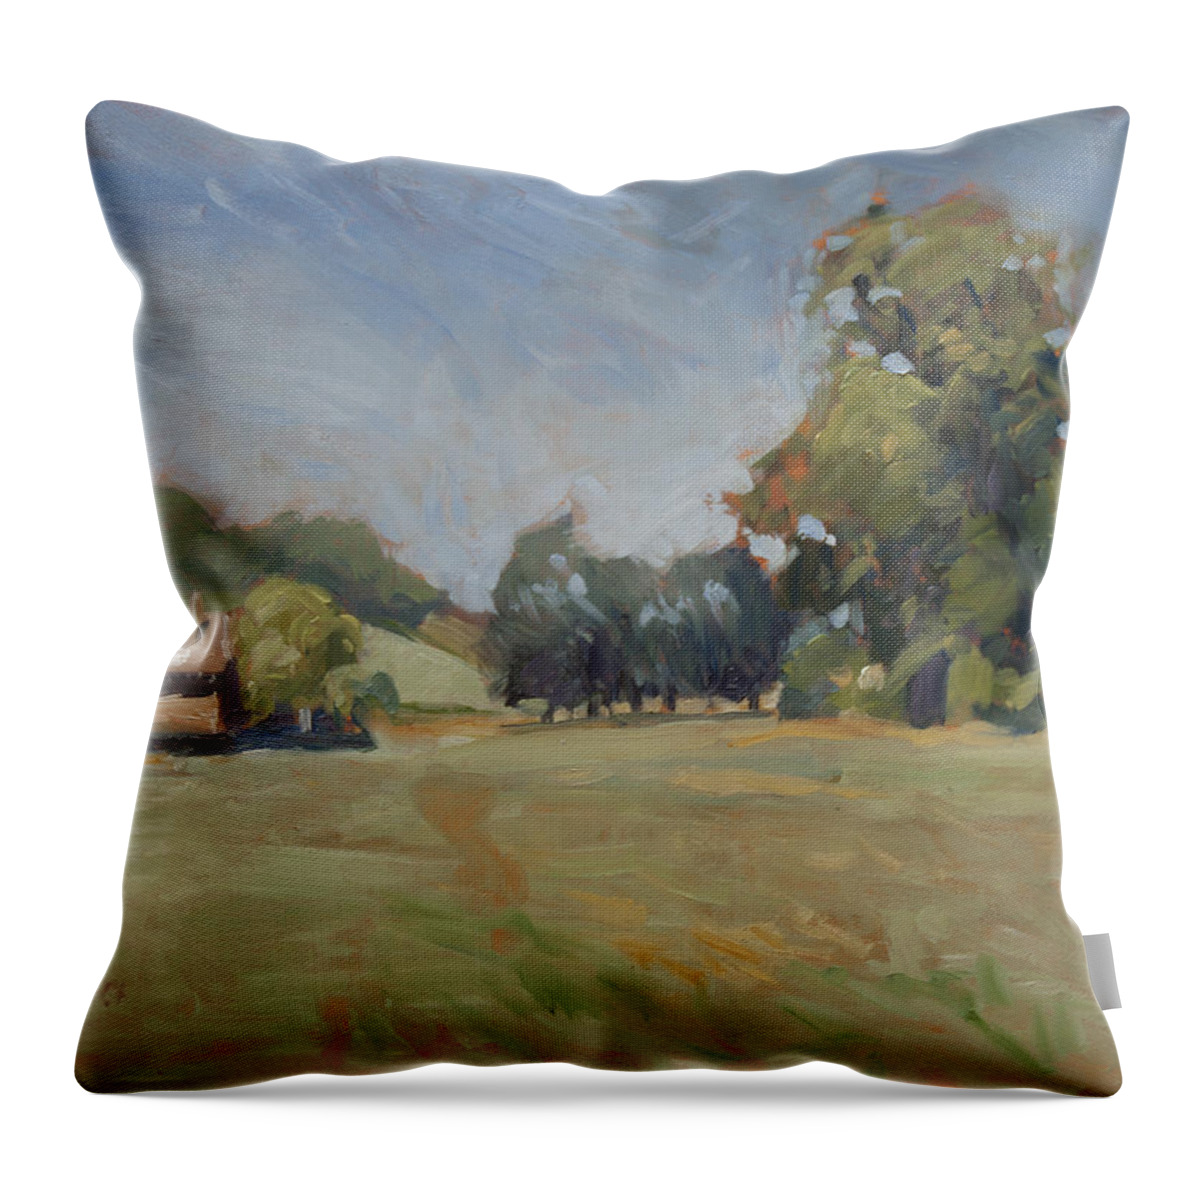 Mdf Throw Pillow featuring the painting House Neder Canne by Nop Briex